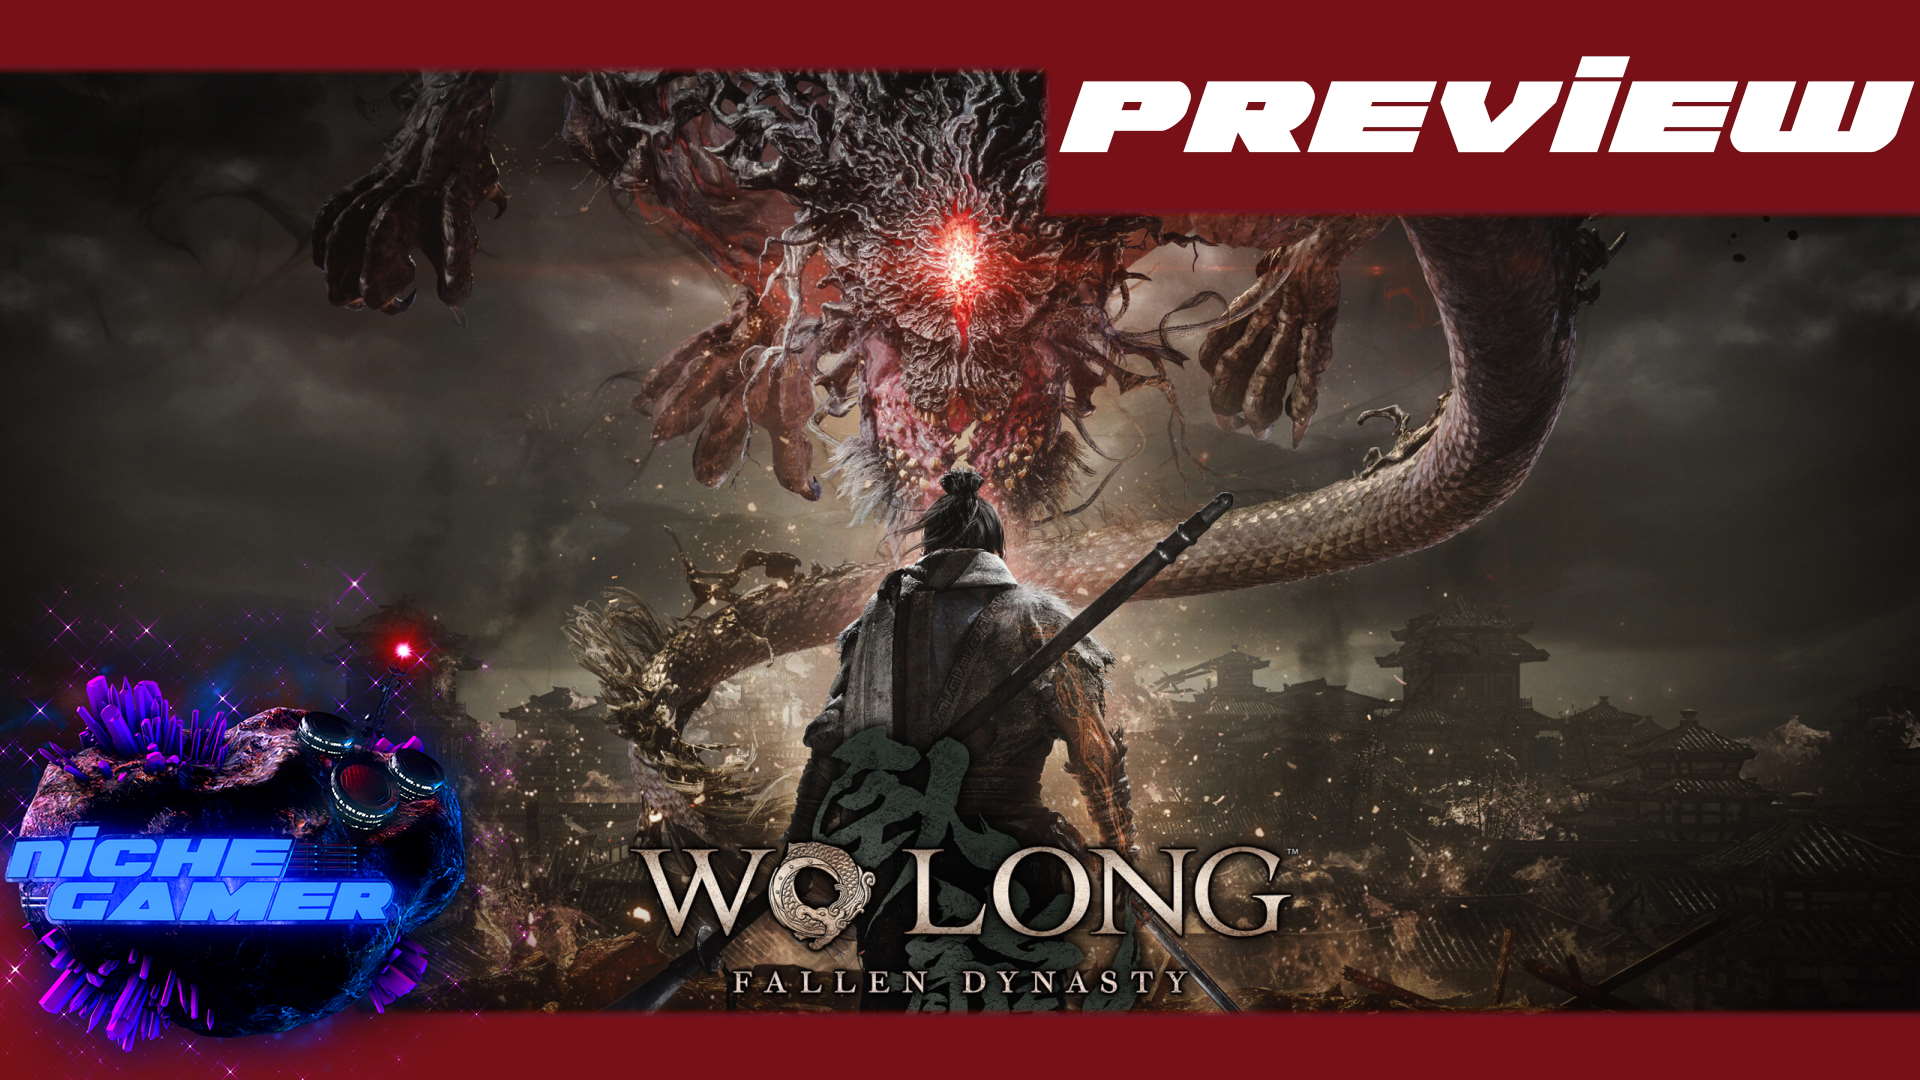 Wo Long: Fallen Dynasty hands-on preview – like a Three Kingdoms era Nioh-spinoff